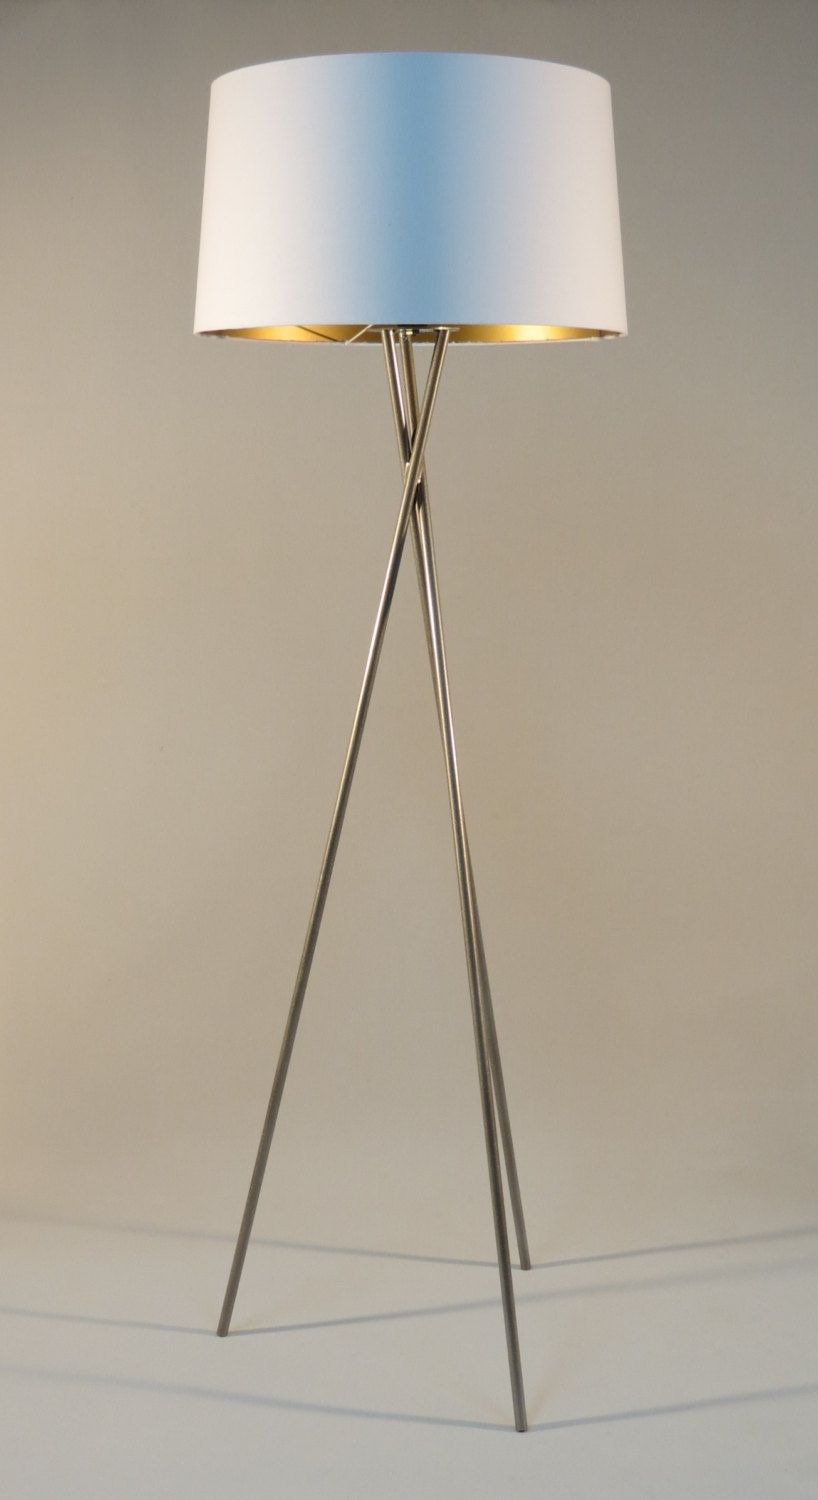 Handmade Tripod Floor Lamp With Light Gray Colored Metal throughout sizing 818 X 1500